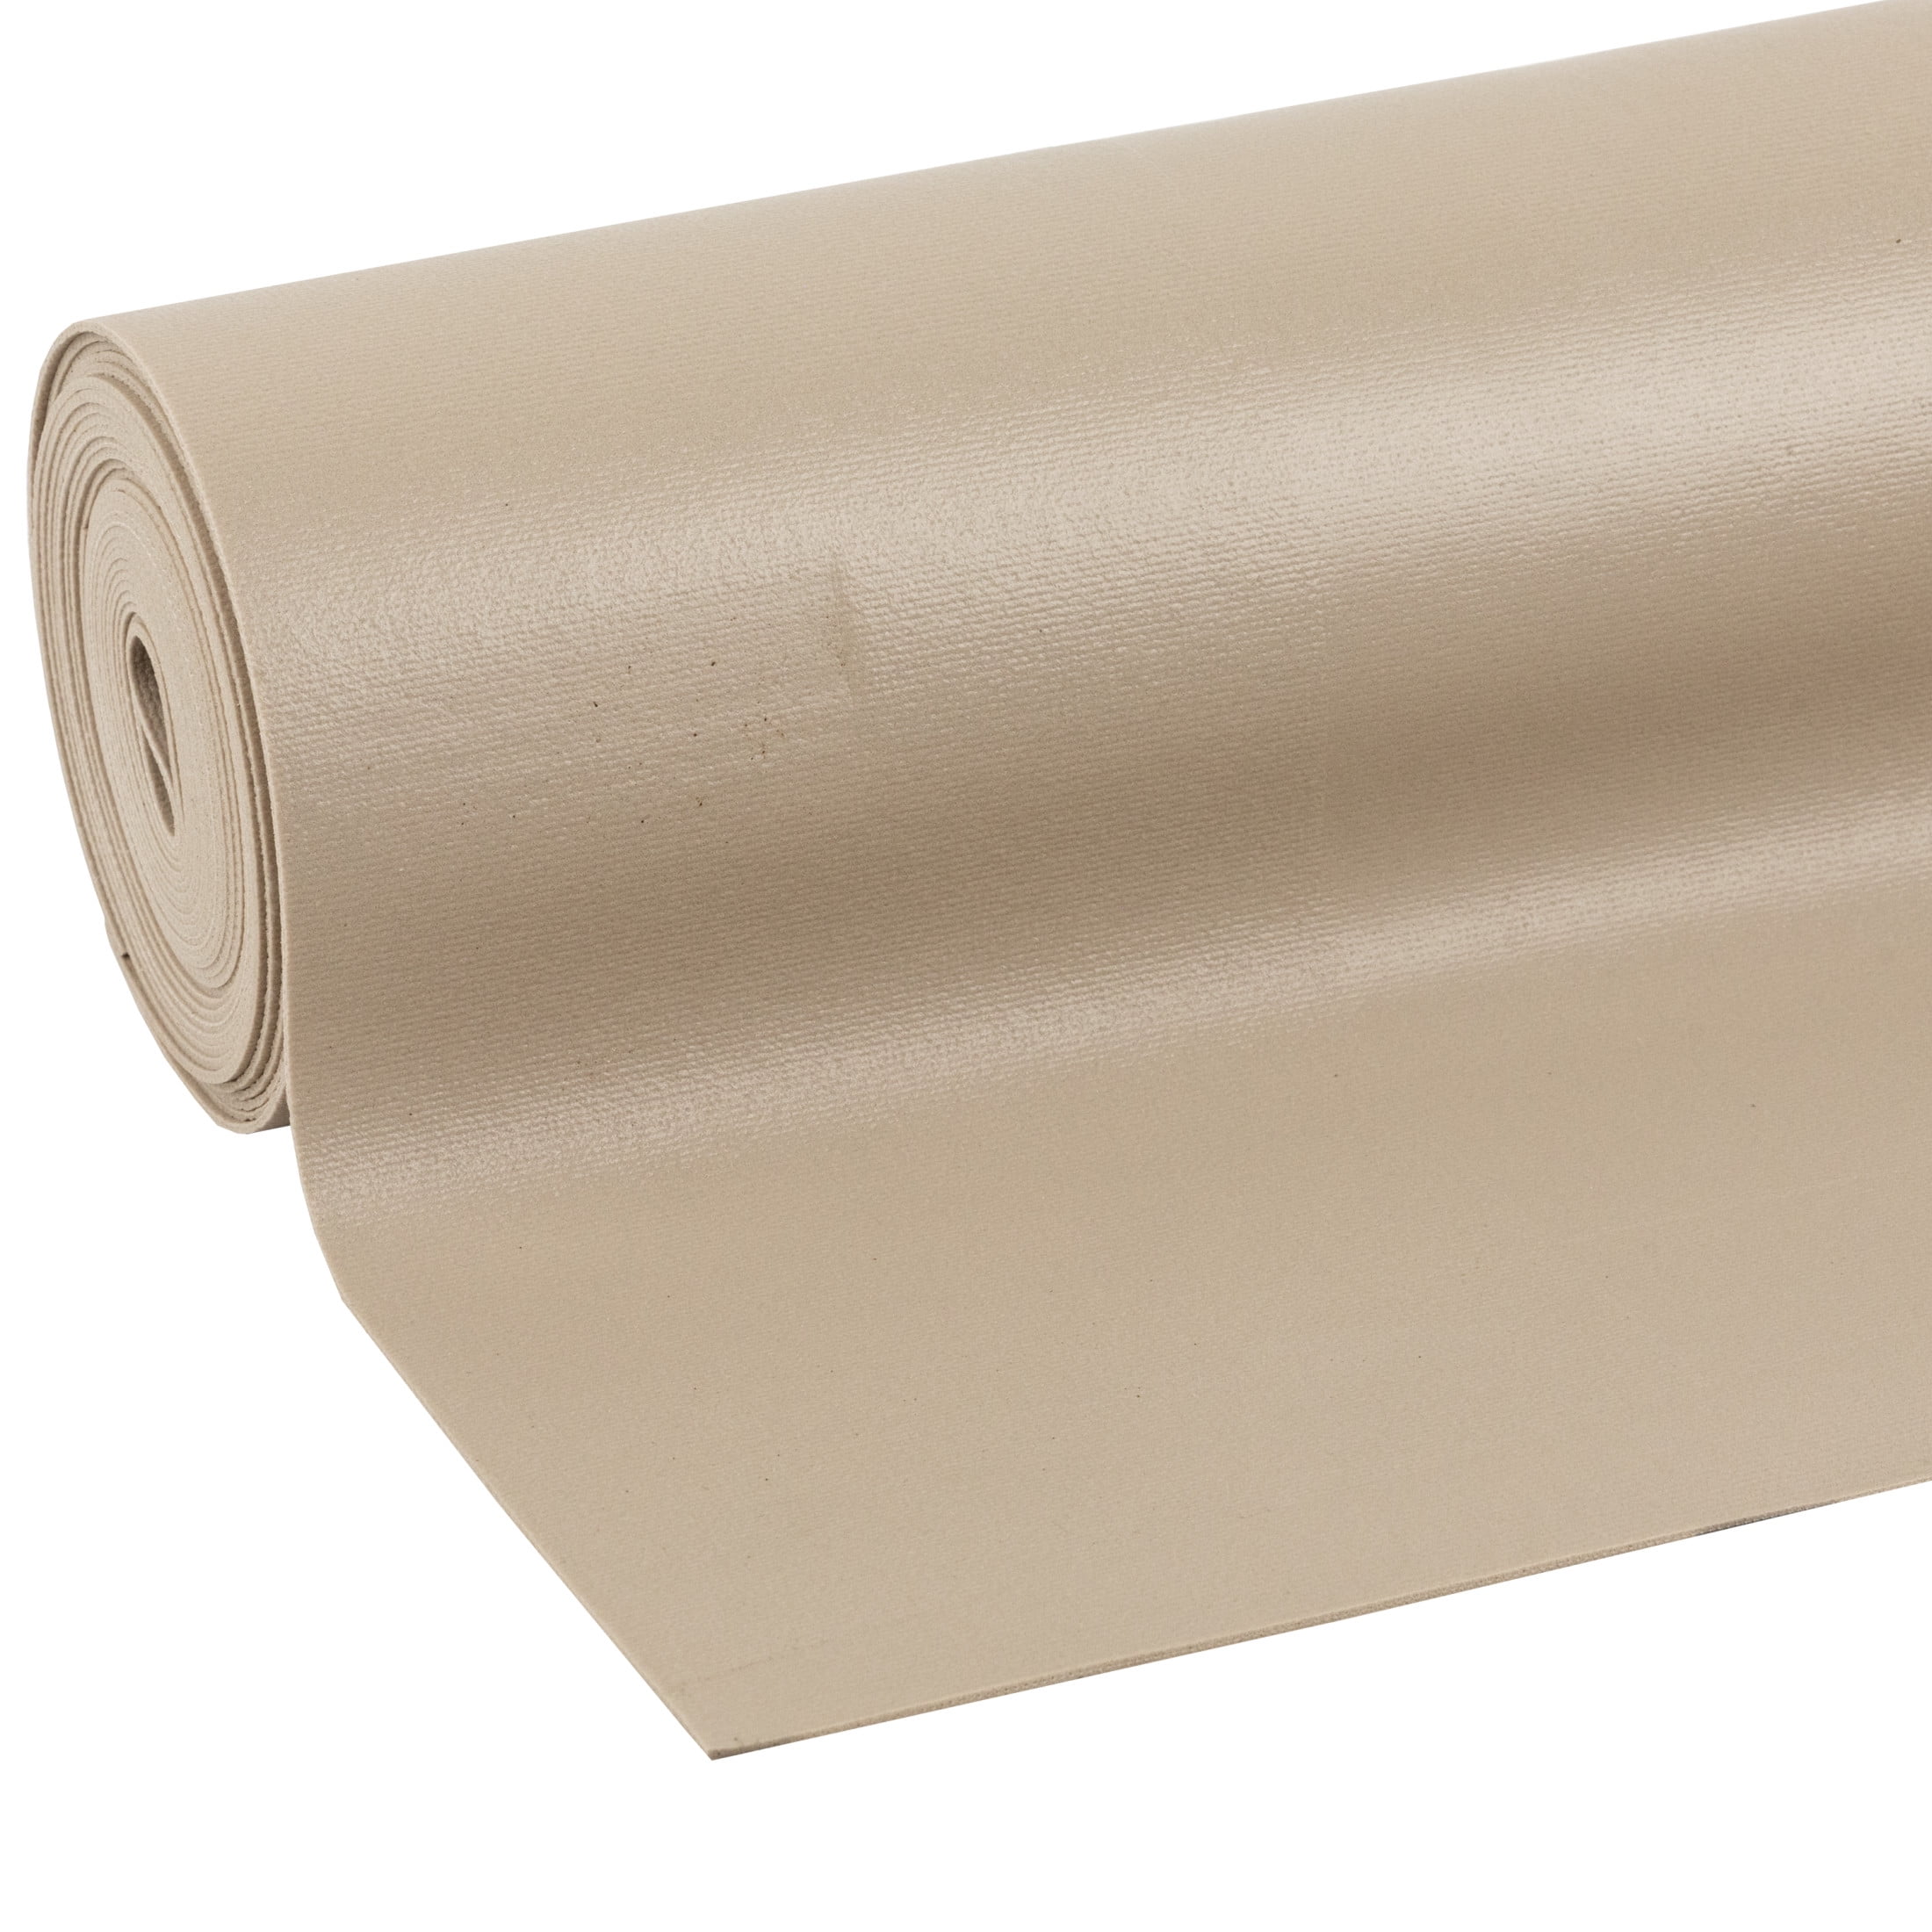 Magic Cover Solid Grip Non-Adhesive Shelf Liner - Taupe, 18 x 4 ft - Kroger